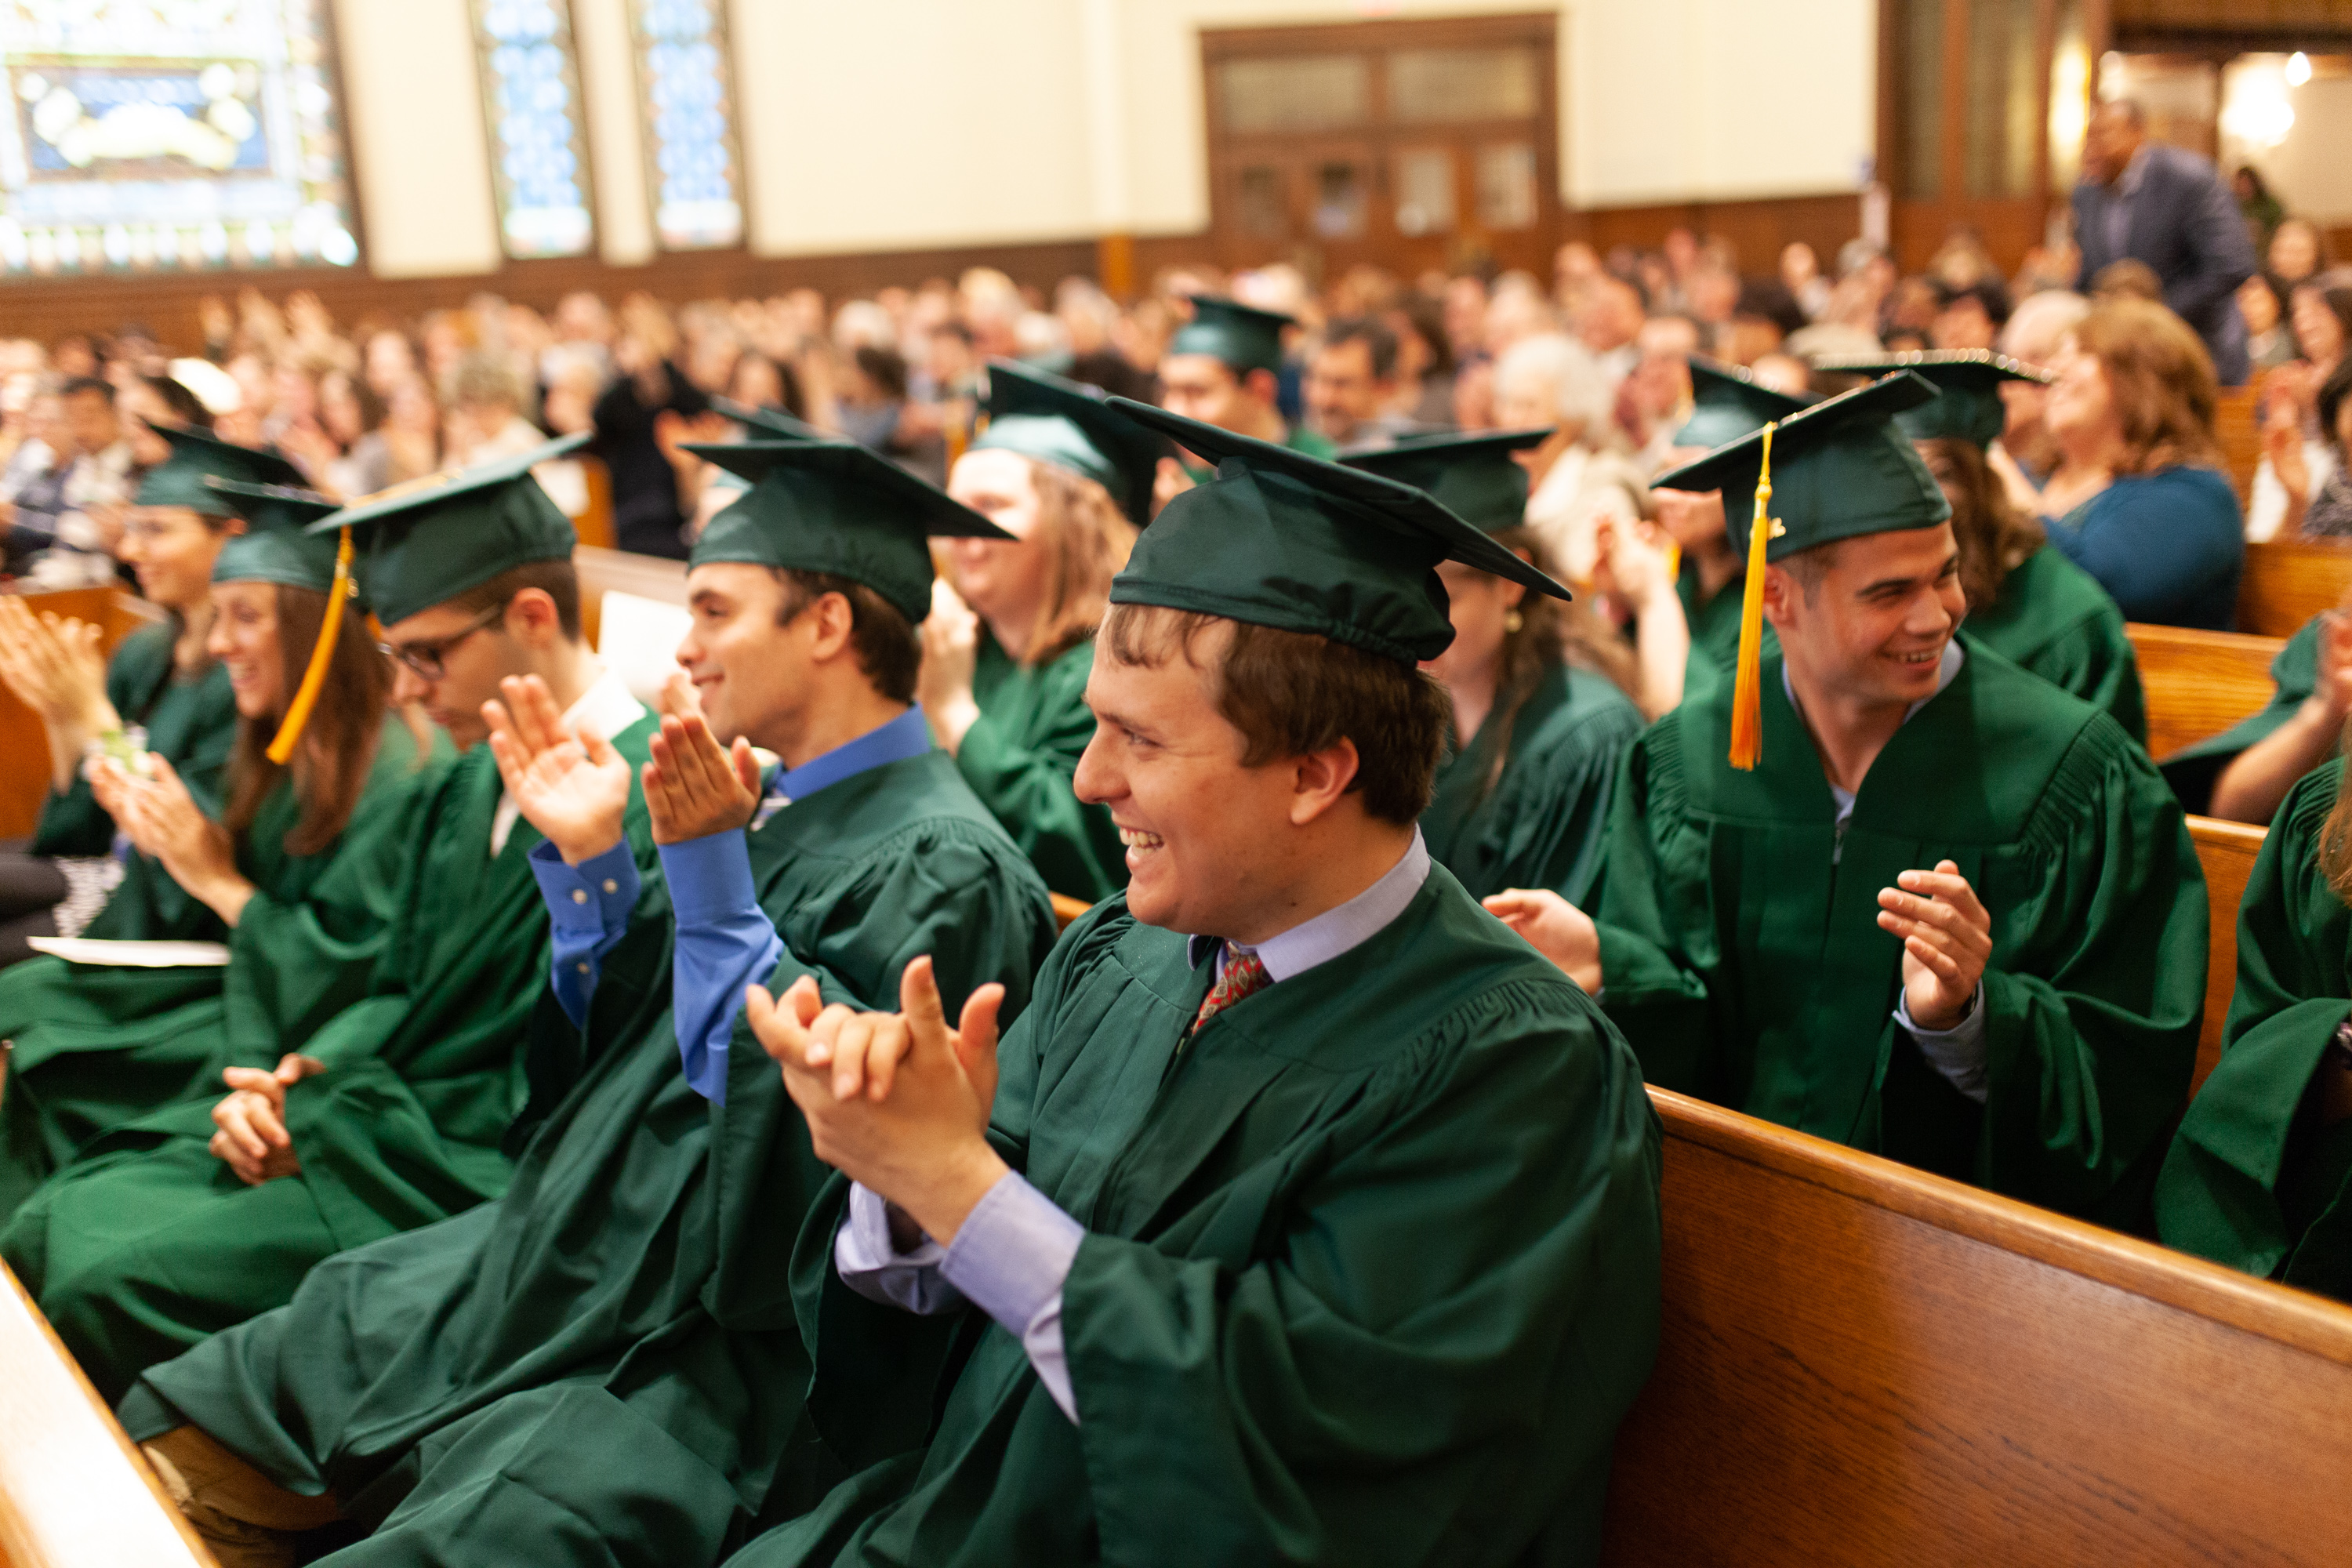 Graduates clap from the pews